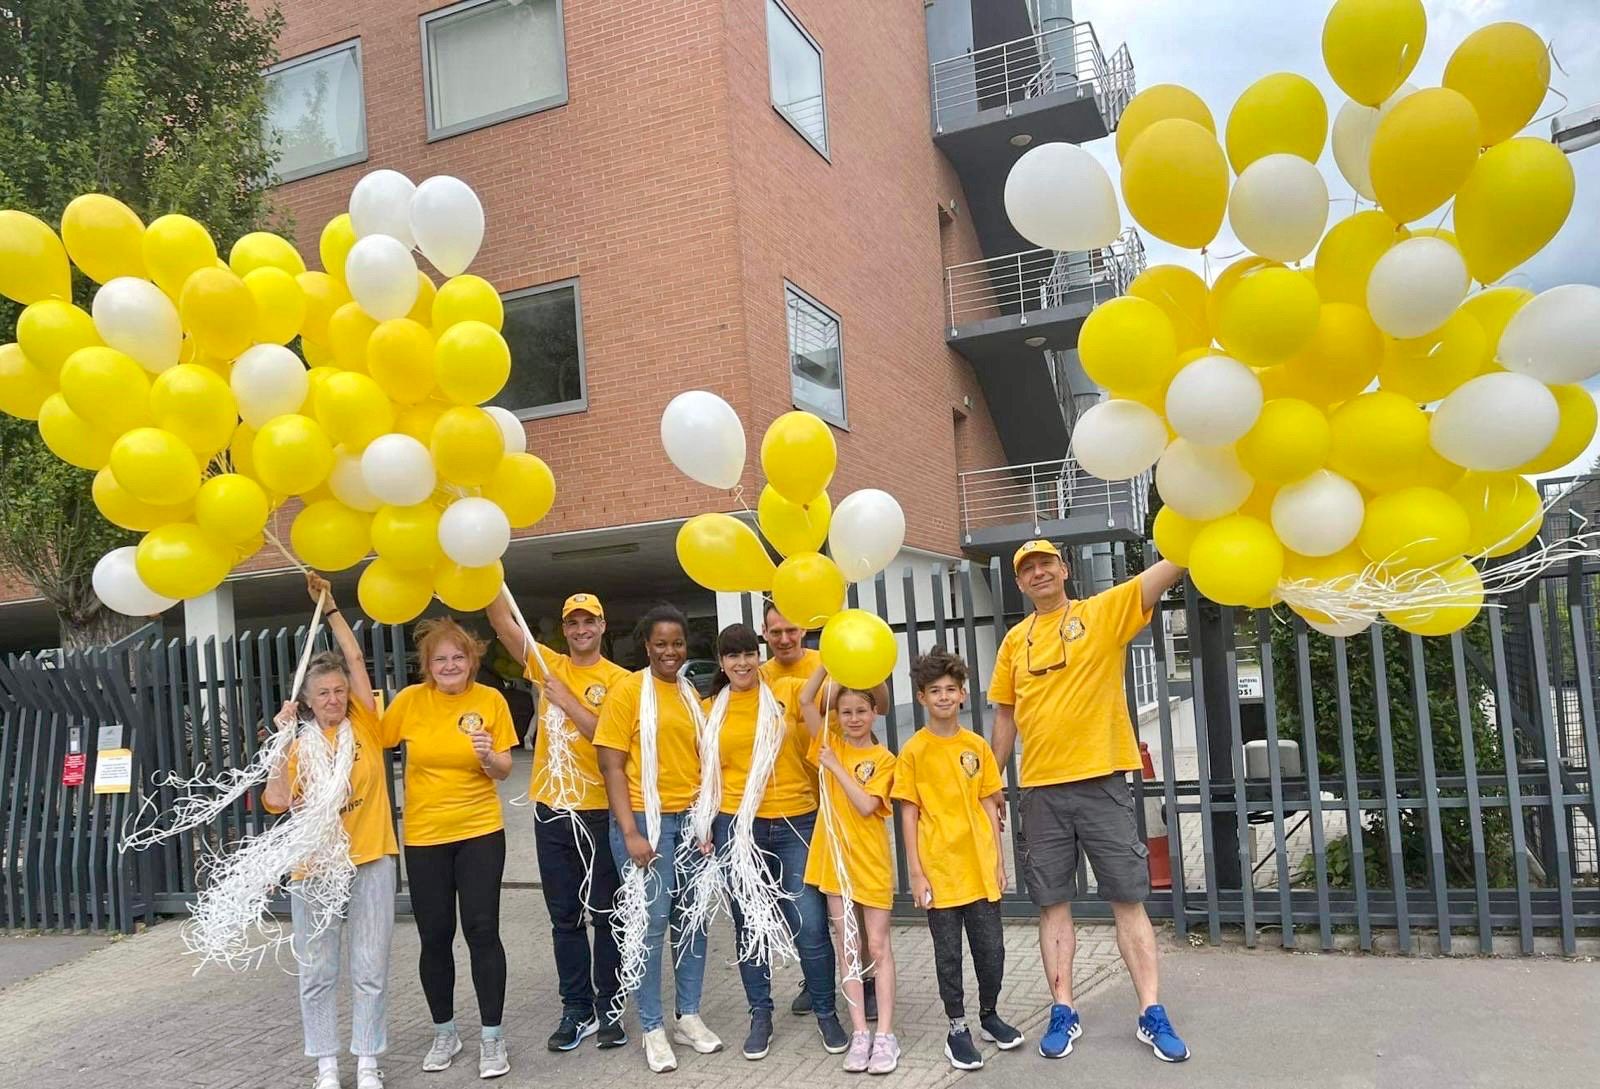 Scientology in Hungary recently celebrated Children’s Day